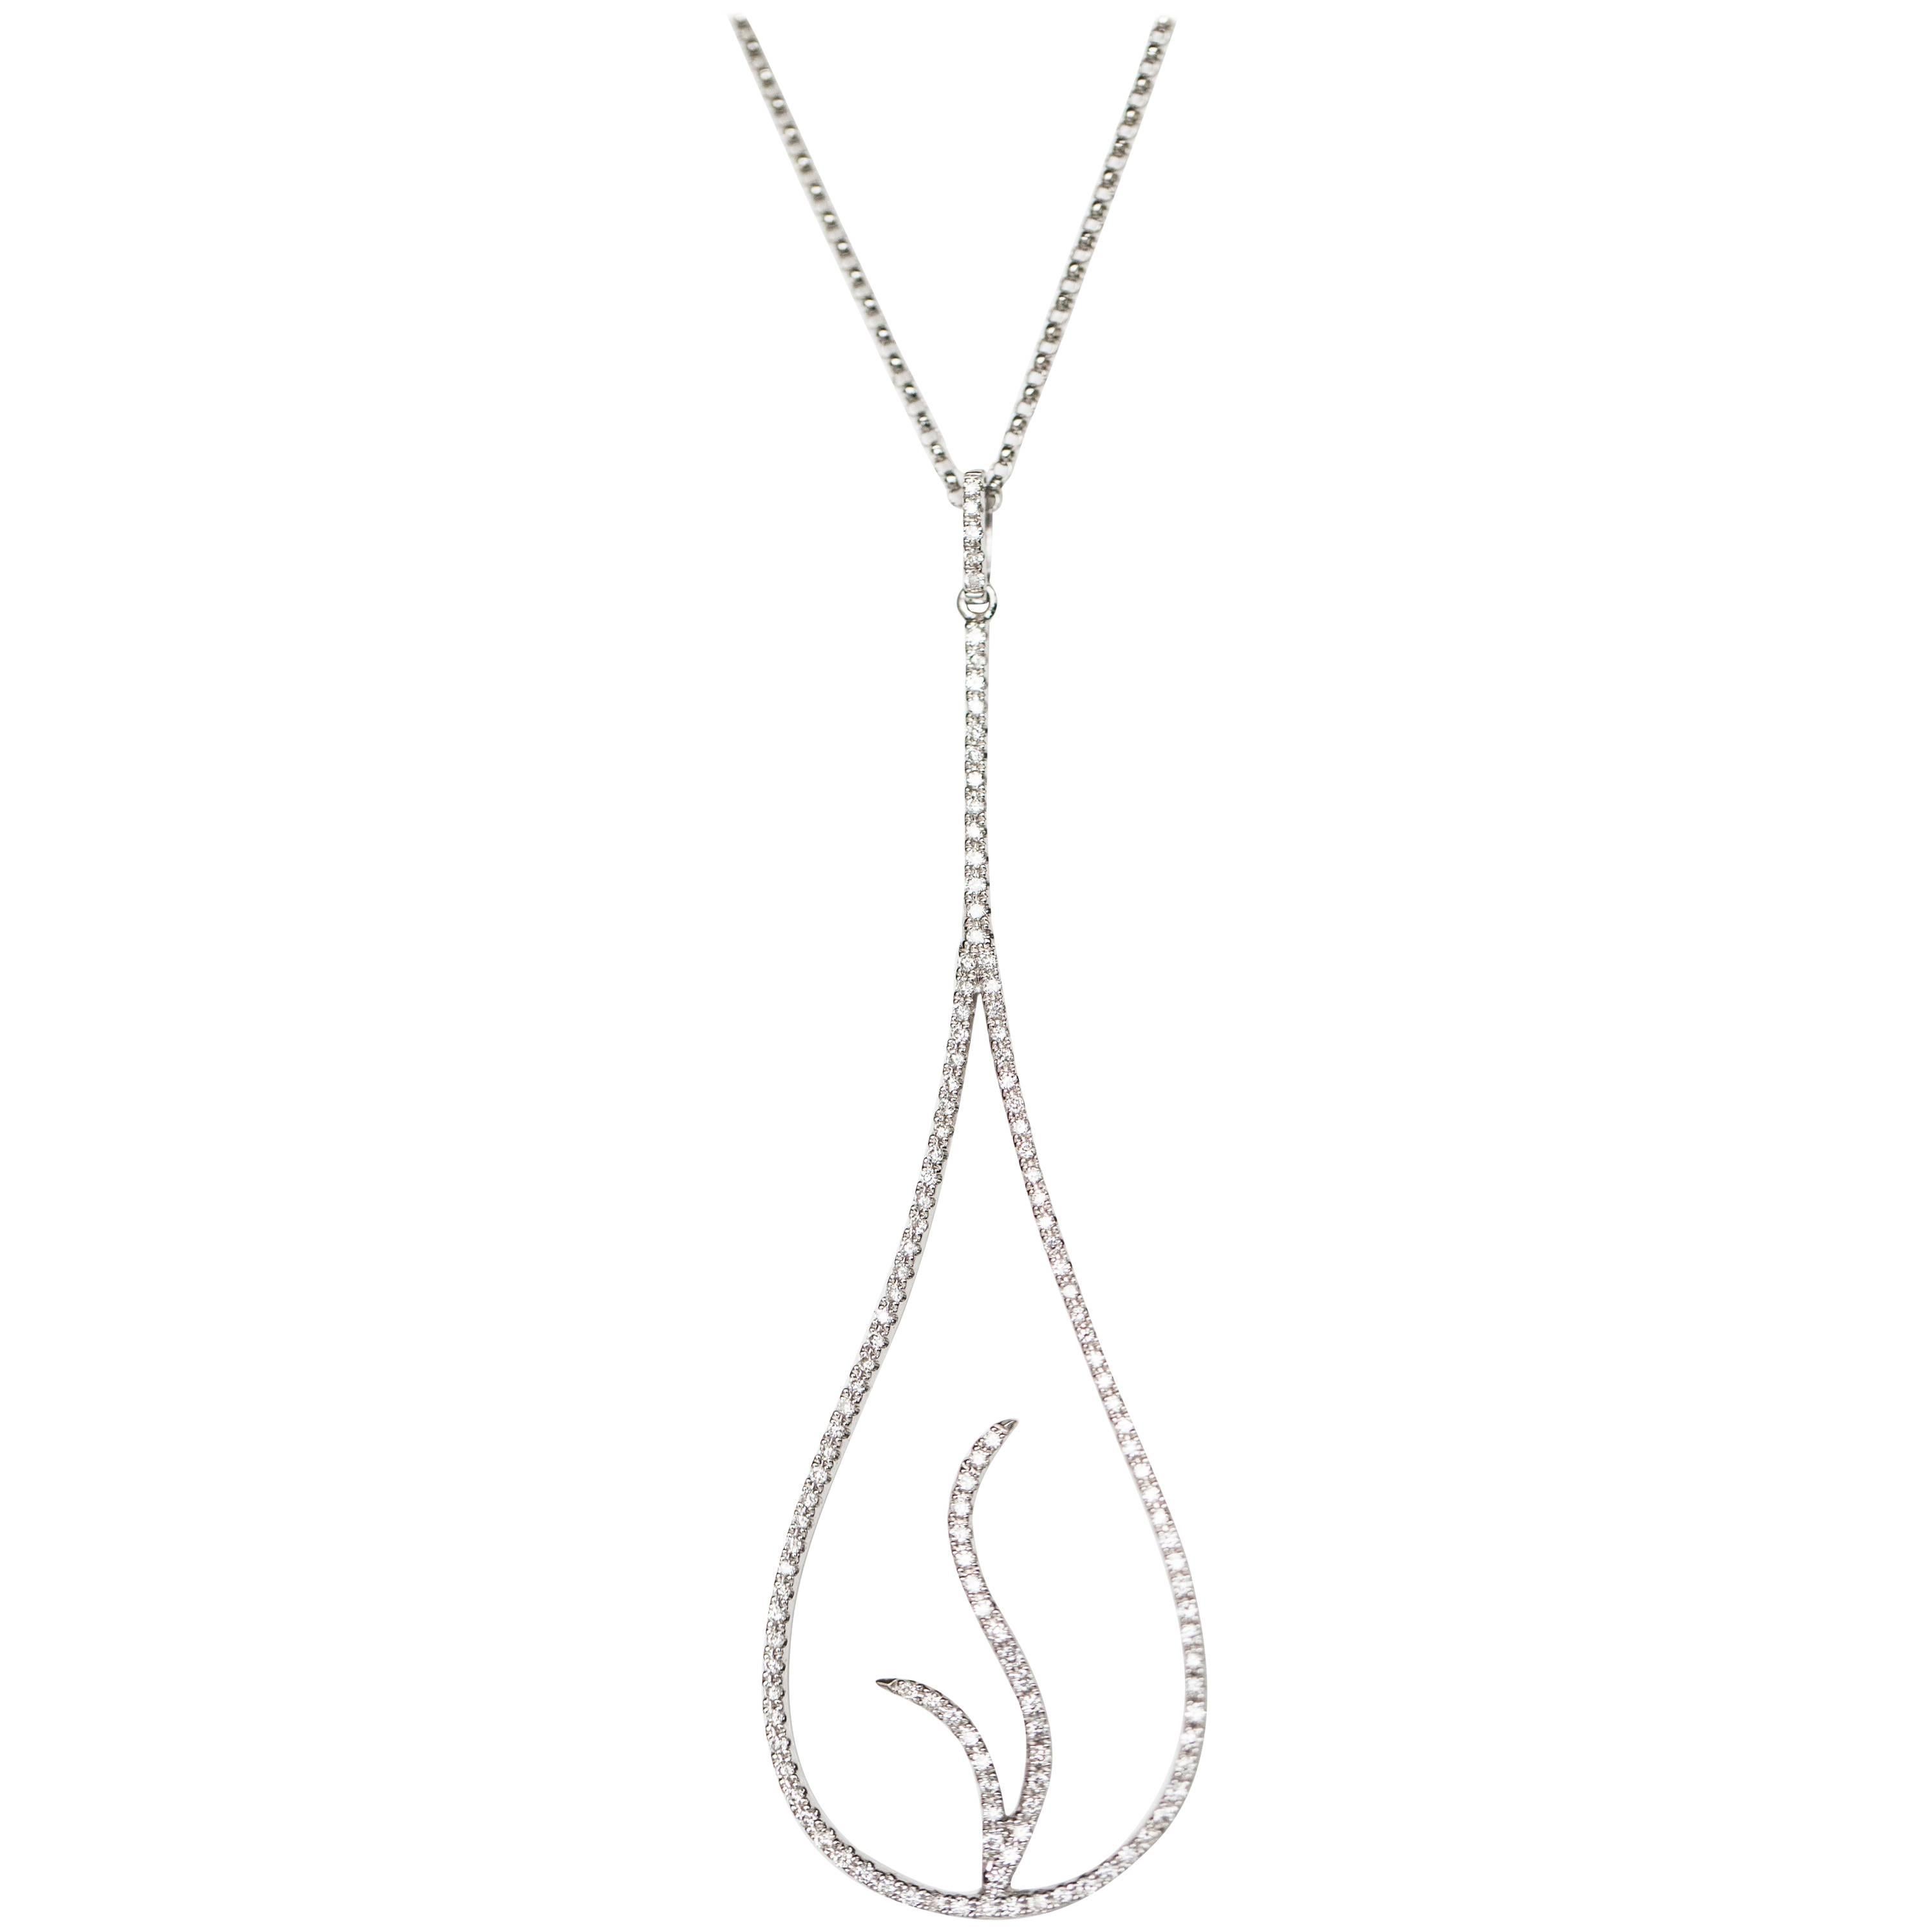 Diamond and 14K Gold Drop Necklace